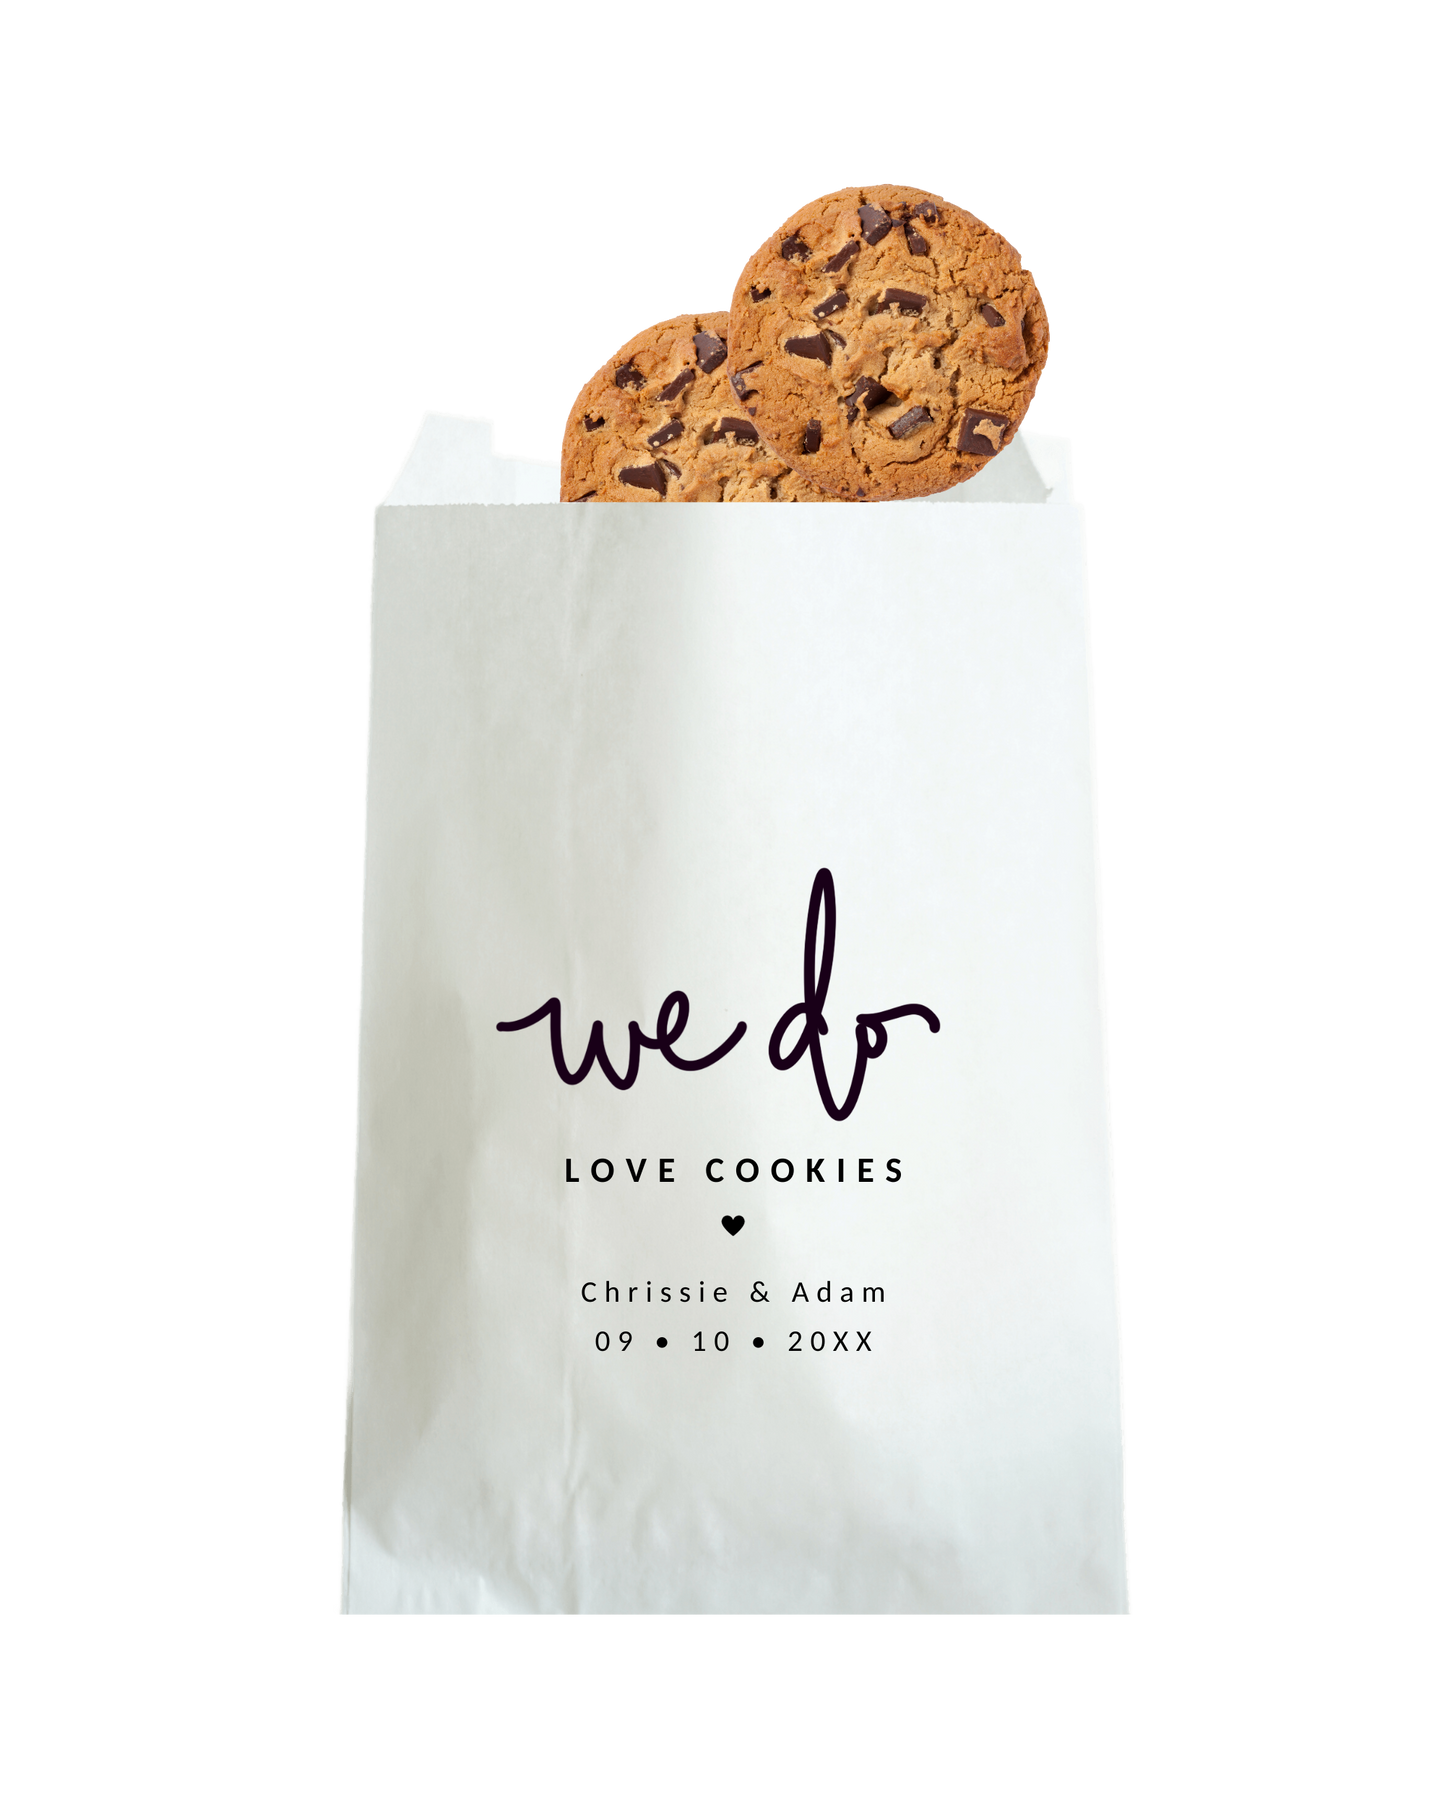 We Do Love Cookies - White Party Bags